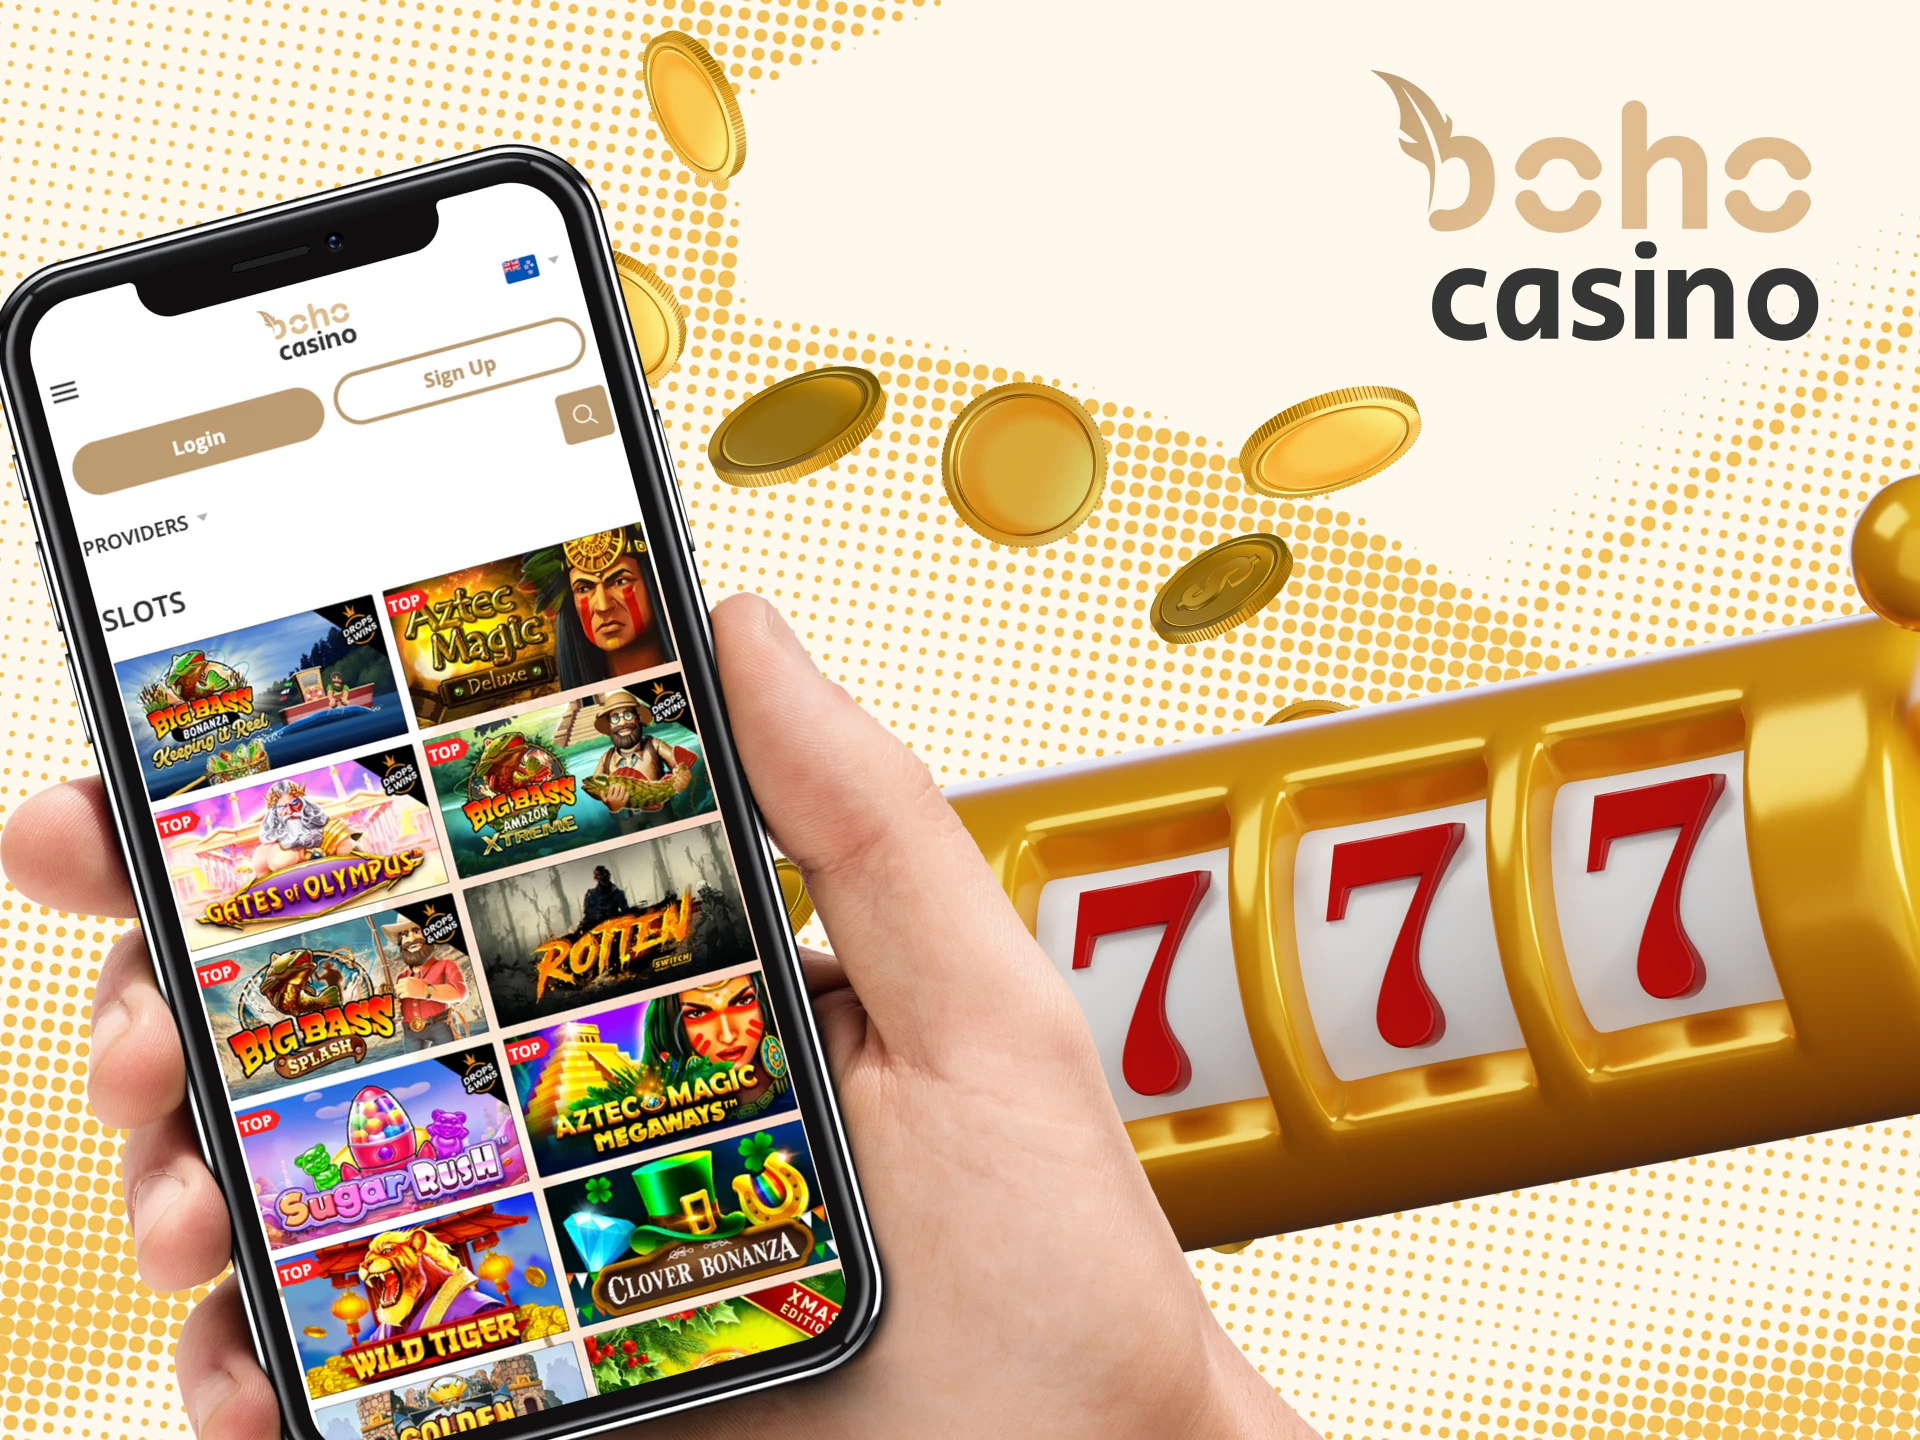 You can play Boho Casino slots via app on your Android or iOS device.